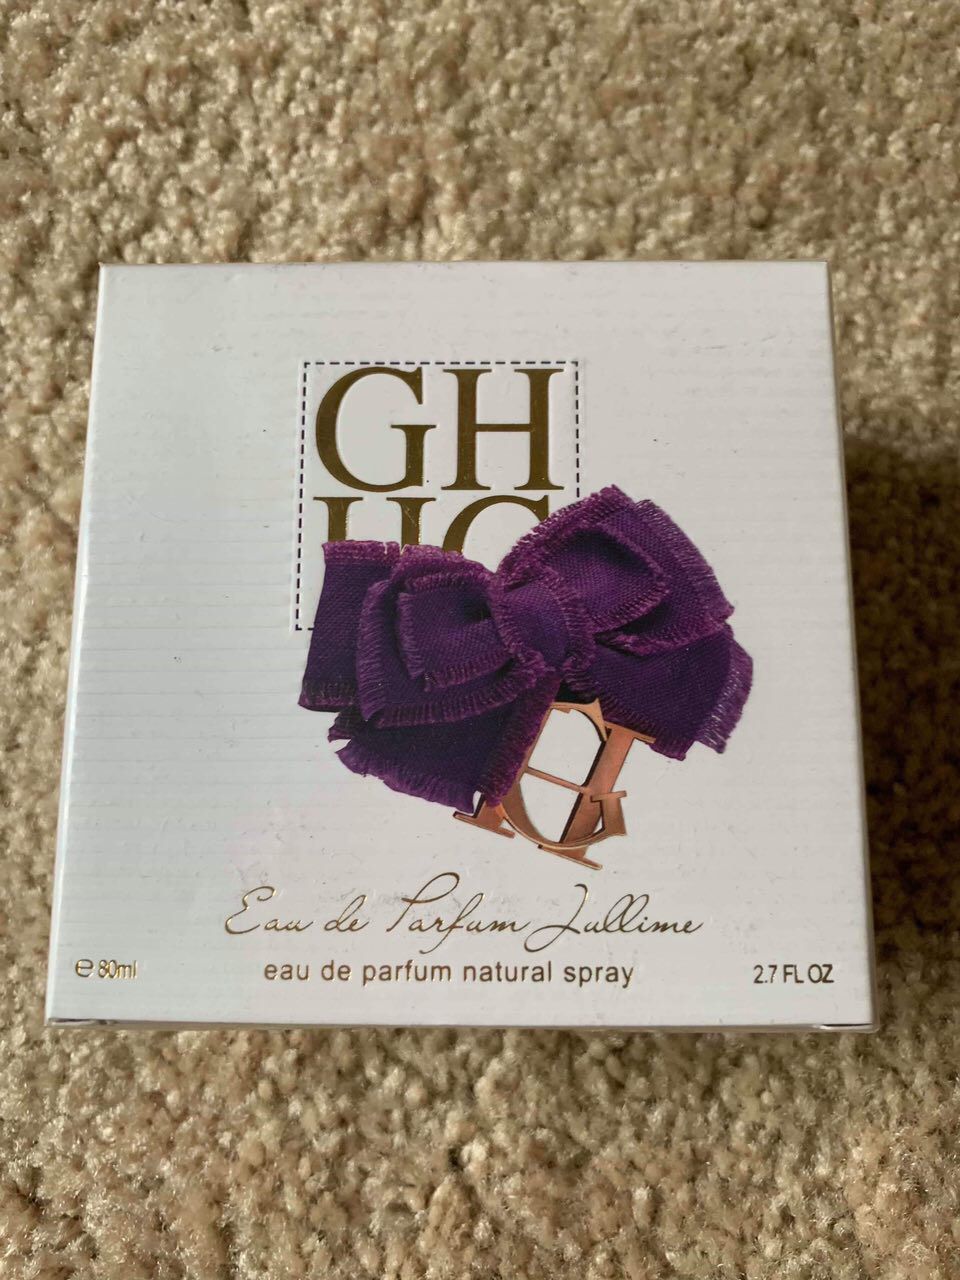 Ghgh perfume femme brand new!!! Asking $10 the $60 msrp for Sale